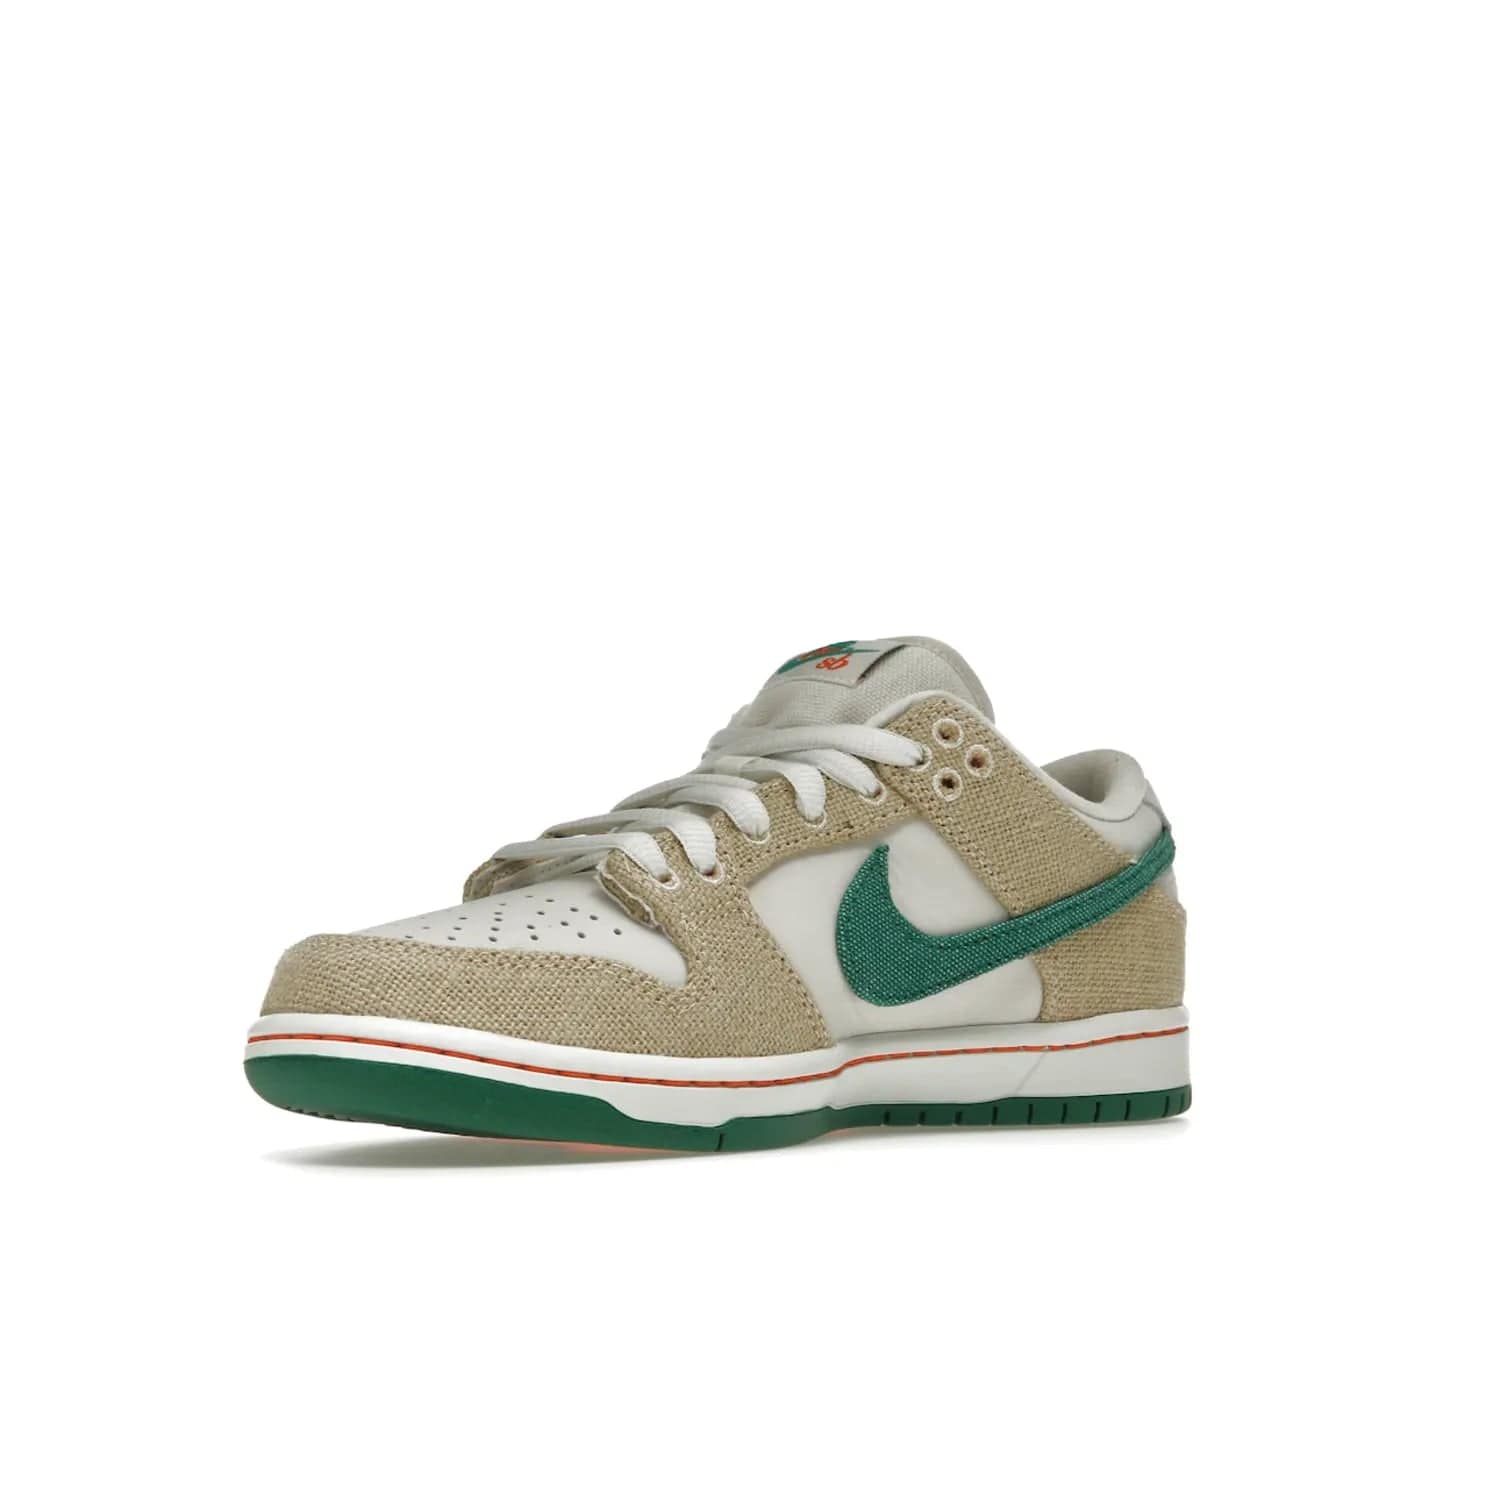 Nike SB Dunk Low Jarritos - Image 15 - Only at www.BallersClubKickz.com - Shop limited edition Nike SB Dunk Low Jarritos! Crafted with white leather and tear-away canvas materials with green accents. Includes orange, green, and white laces to customize your look. Available now.